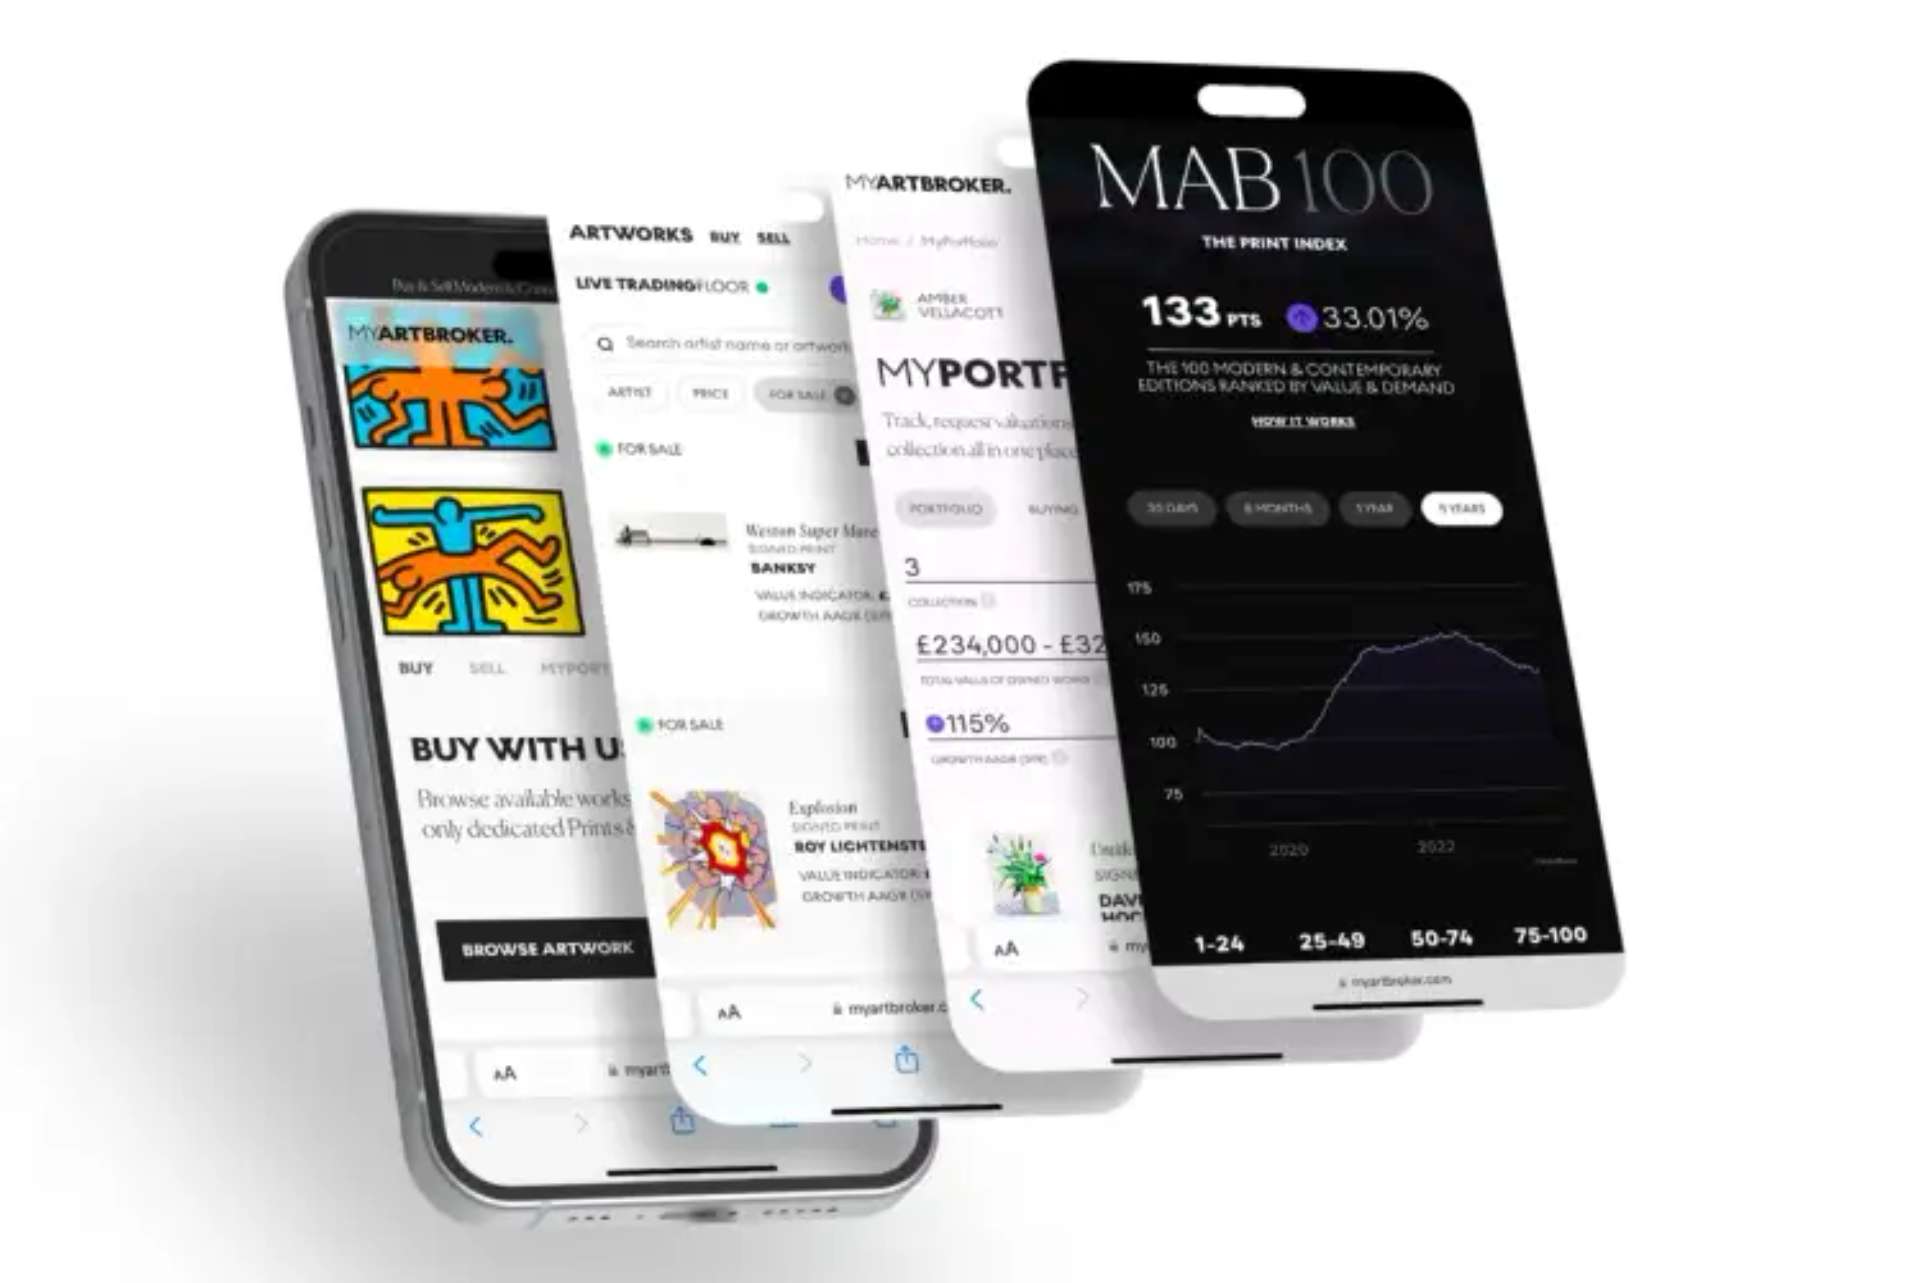 A graphic of a phone screen showing MyArtBroker's MAB100 index and other tabs on the website